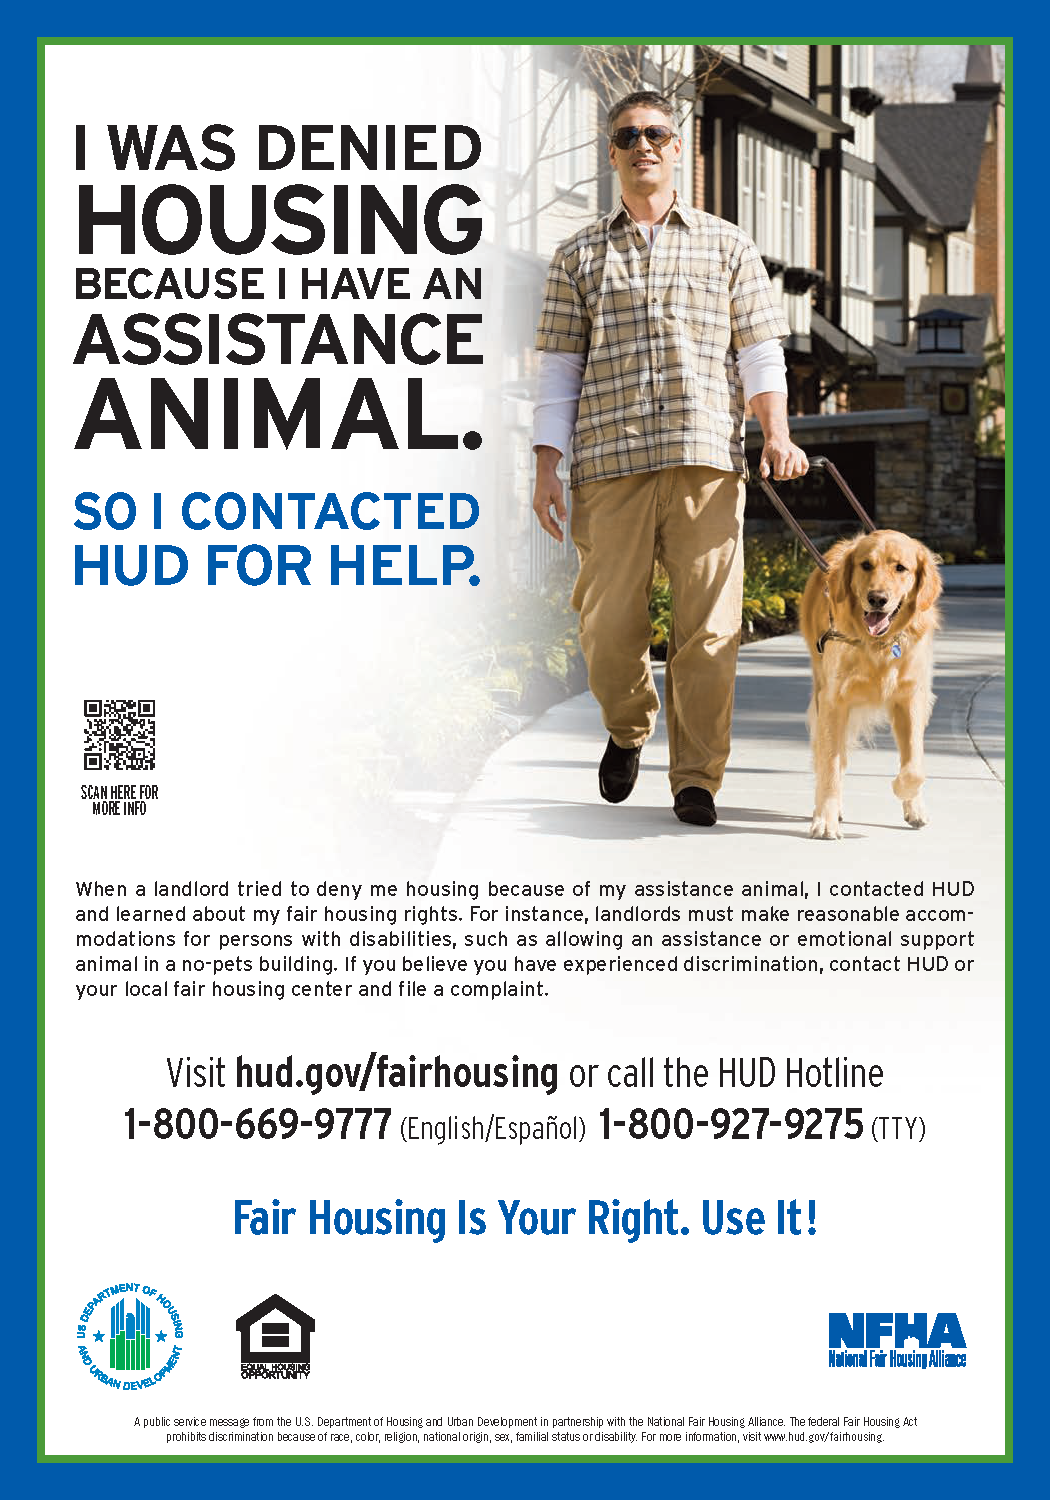 I was denied housing because I have an assistance animal. So I contacted HUD for help. Visit hud.gov/fairhousing or call the HUD Hotline 1-800-669-9777 for English/Spanish or 1-800-927-9275 for teletypewriter.